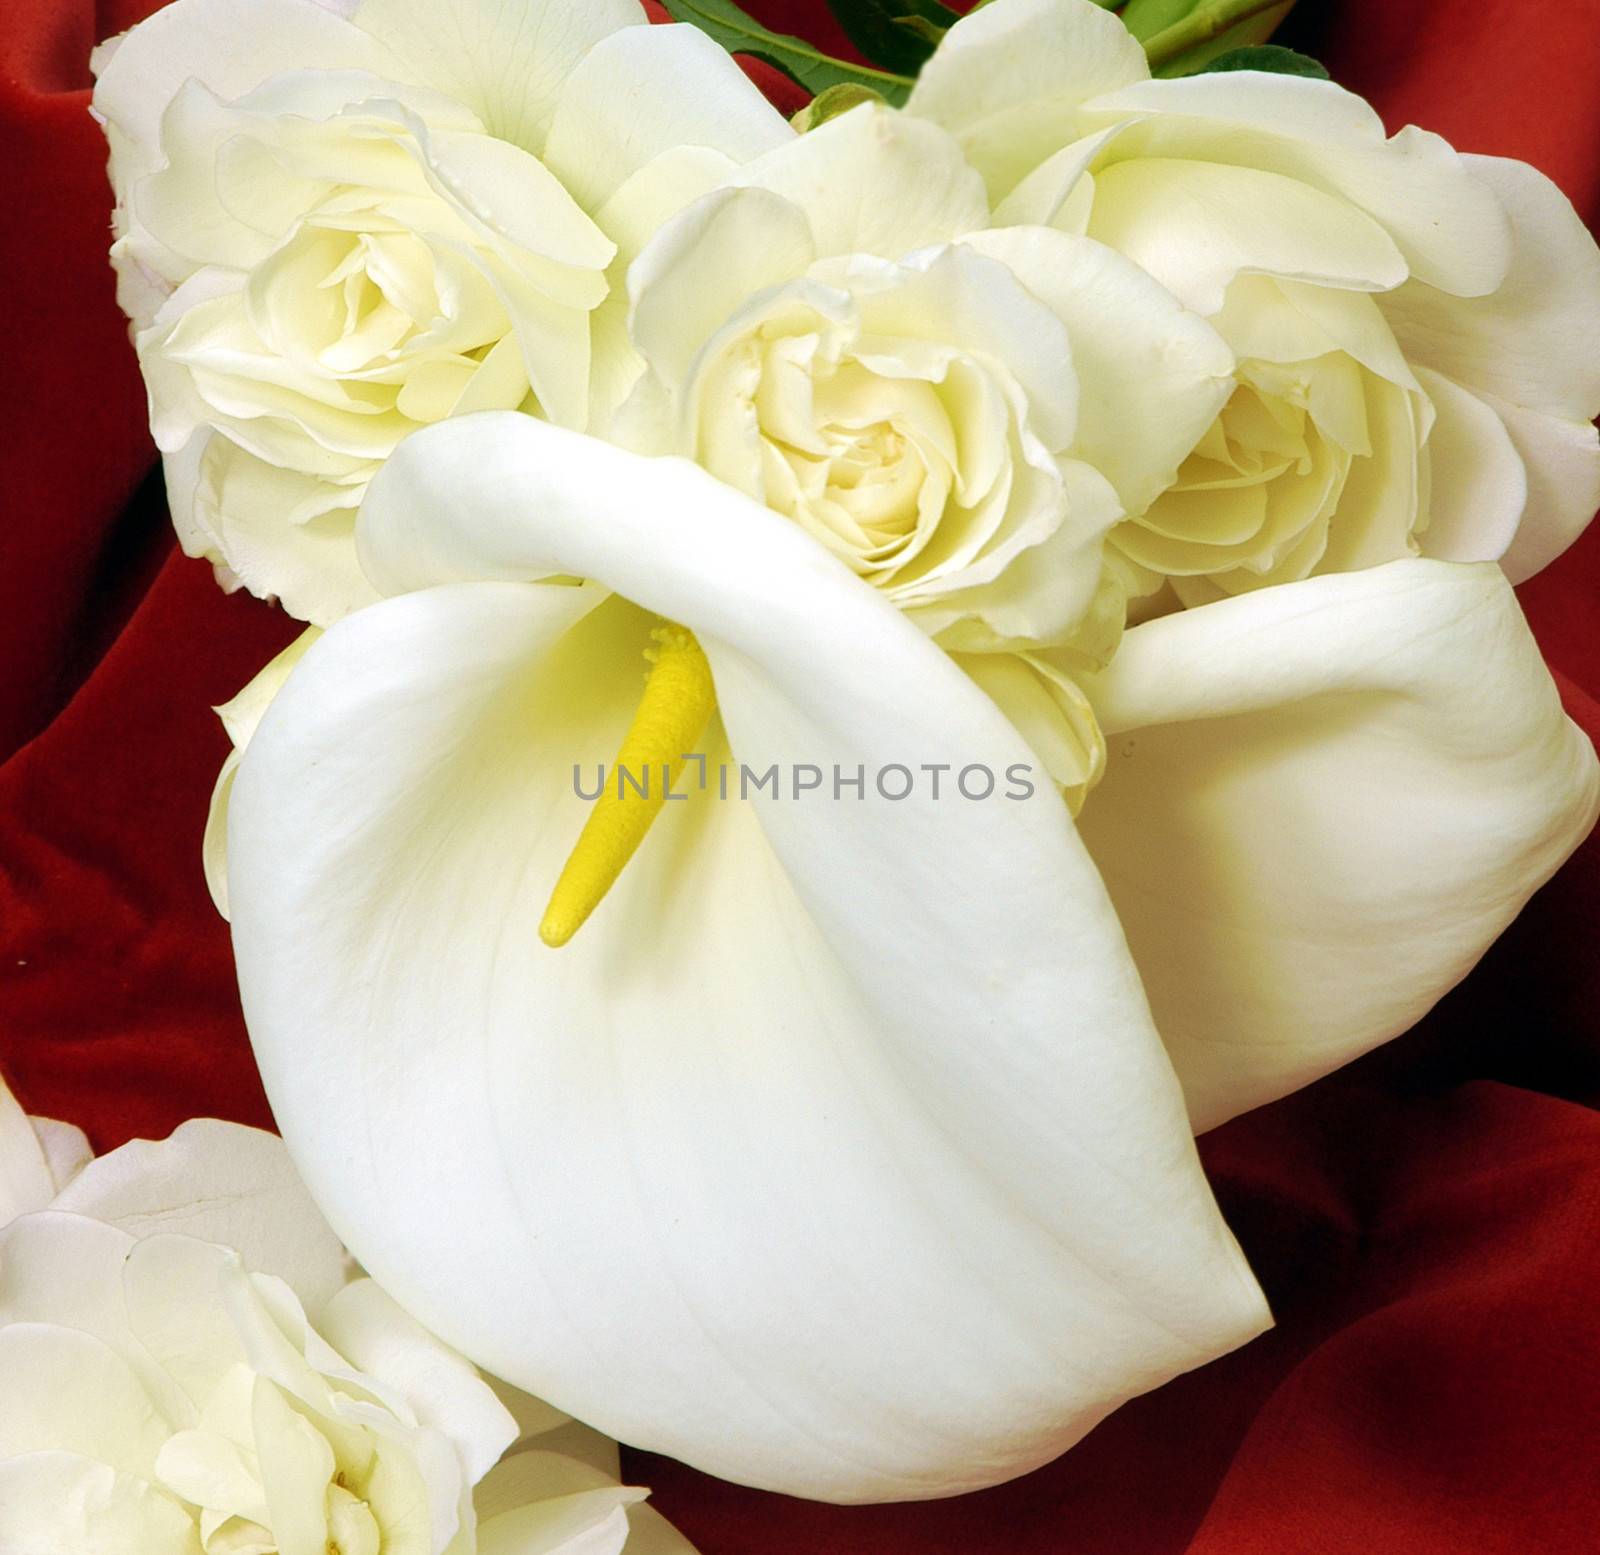 Beautifully presented and photographed florals in the Studio.